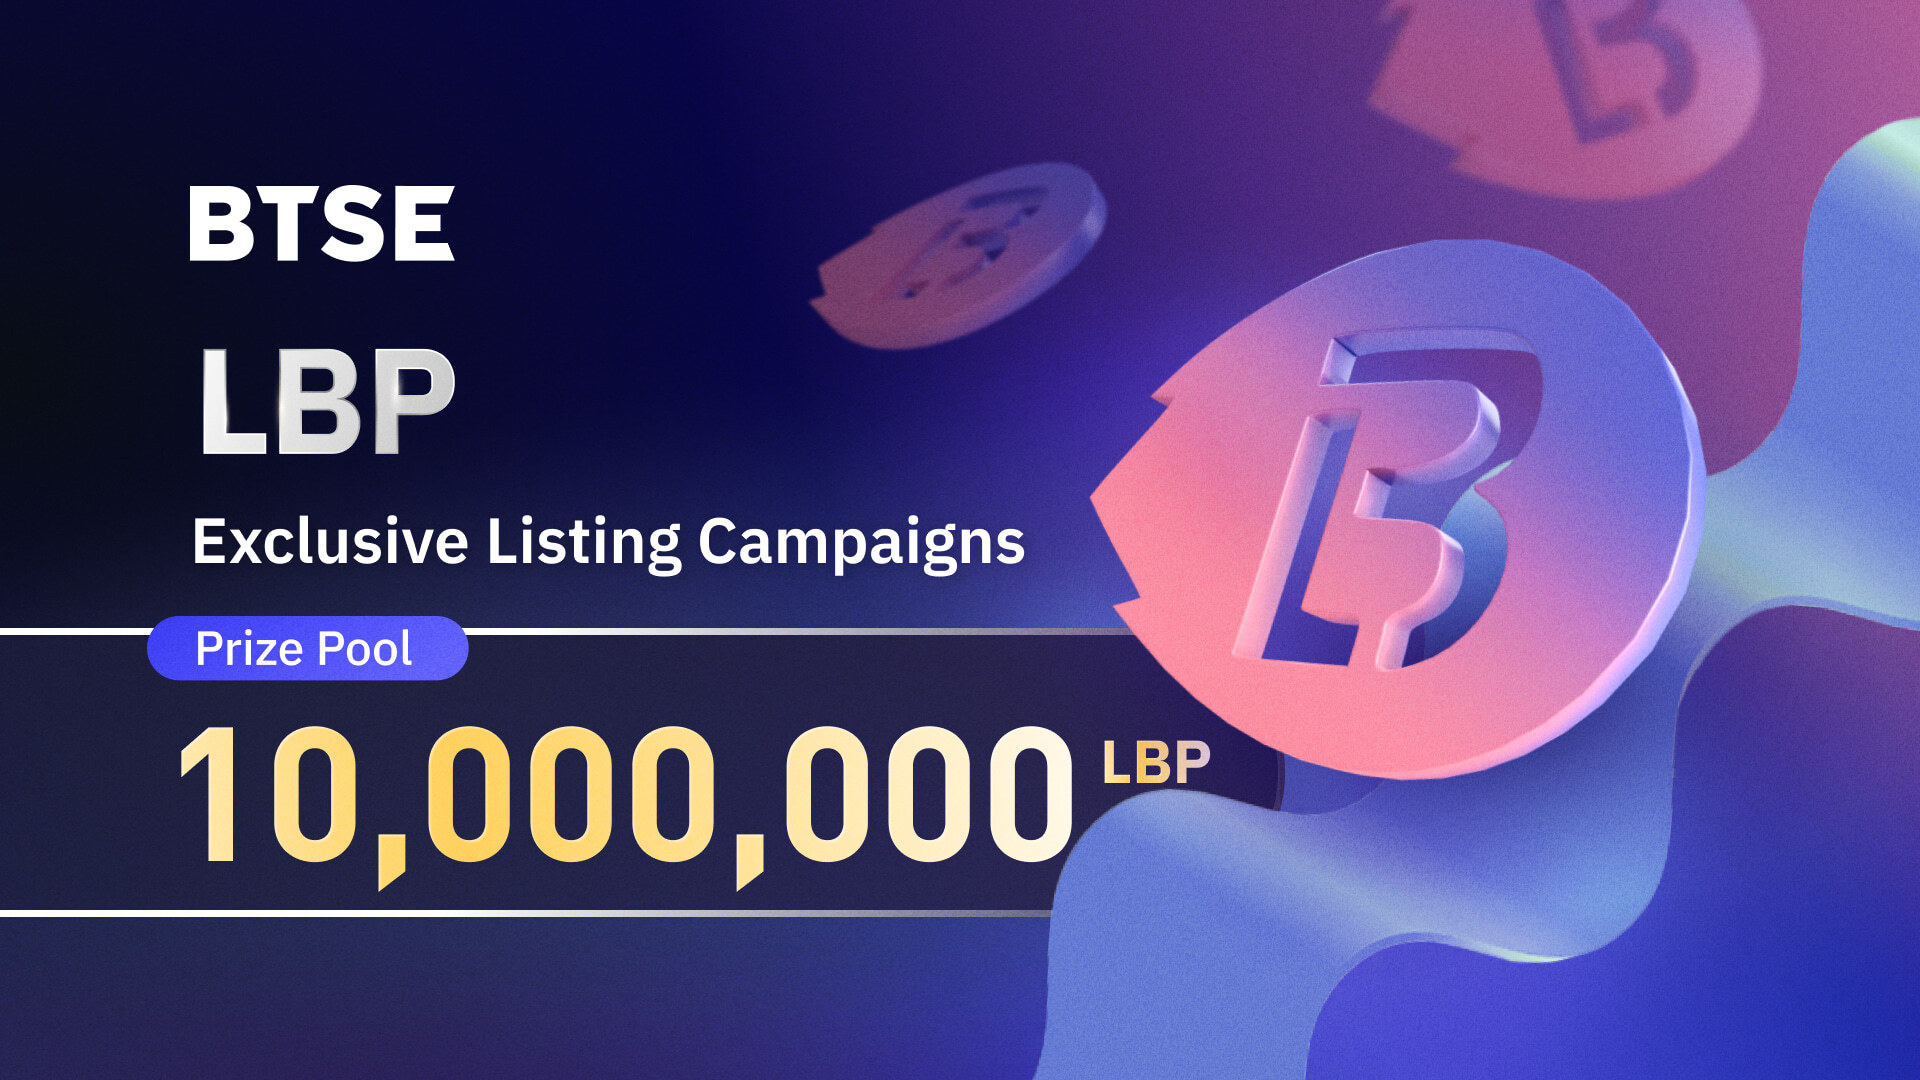 Launchblock.com (LBP) Has Landed on BTSE – Join the Celebrations & Get a Chance to Share in 10,000,000 LBP Tokens!